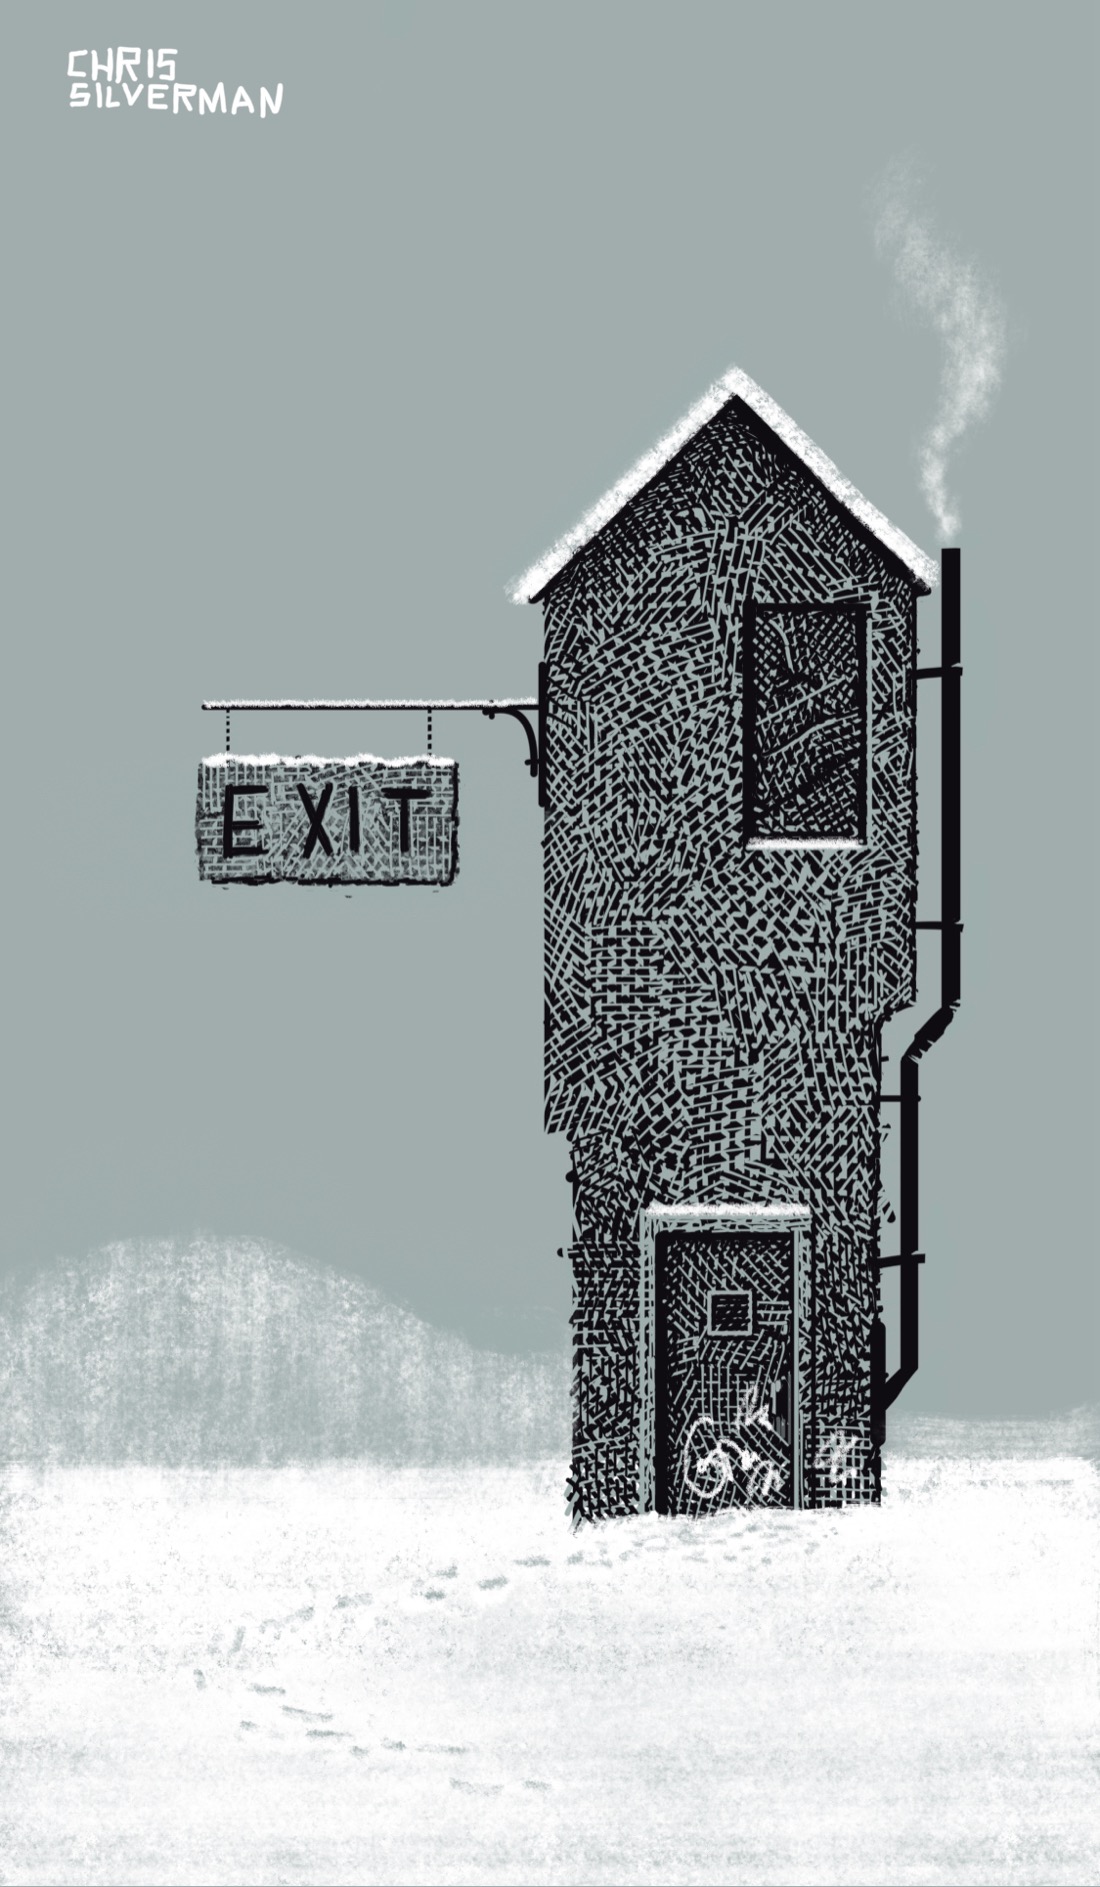 A tall, oddly narrow brick building in the middle of a snowy field. The sky is slate-gray, the way it is when snow is right around the corner. The building is roughly three stories tall, with a small closet-like door at the base and a single small window in the top right, directly under the pointed roof. The roof is covered with snow. The door is covered with illegible graffiti. The window is boarded up. Bolted to the right side of the building is a metal pipe chimney. While the building appears abandoned, there is smoke rising out of the top of the chimney, and numerous footprints in the snow around the door, implying that someone is inside. Most strangely of all is the sign—a slab suspended from a metal arm, similar to a shopkeeper's sign—extending off of the left side of the building, with the word "exit" on it. Behind the building is the blurry mound of a snow-covered hill, and then nothing: just the heavy gray sky. The building is drawn in black ink.